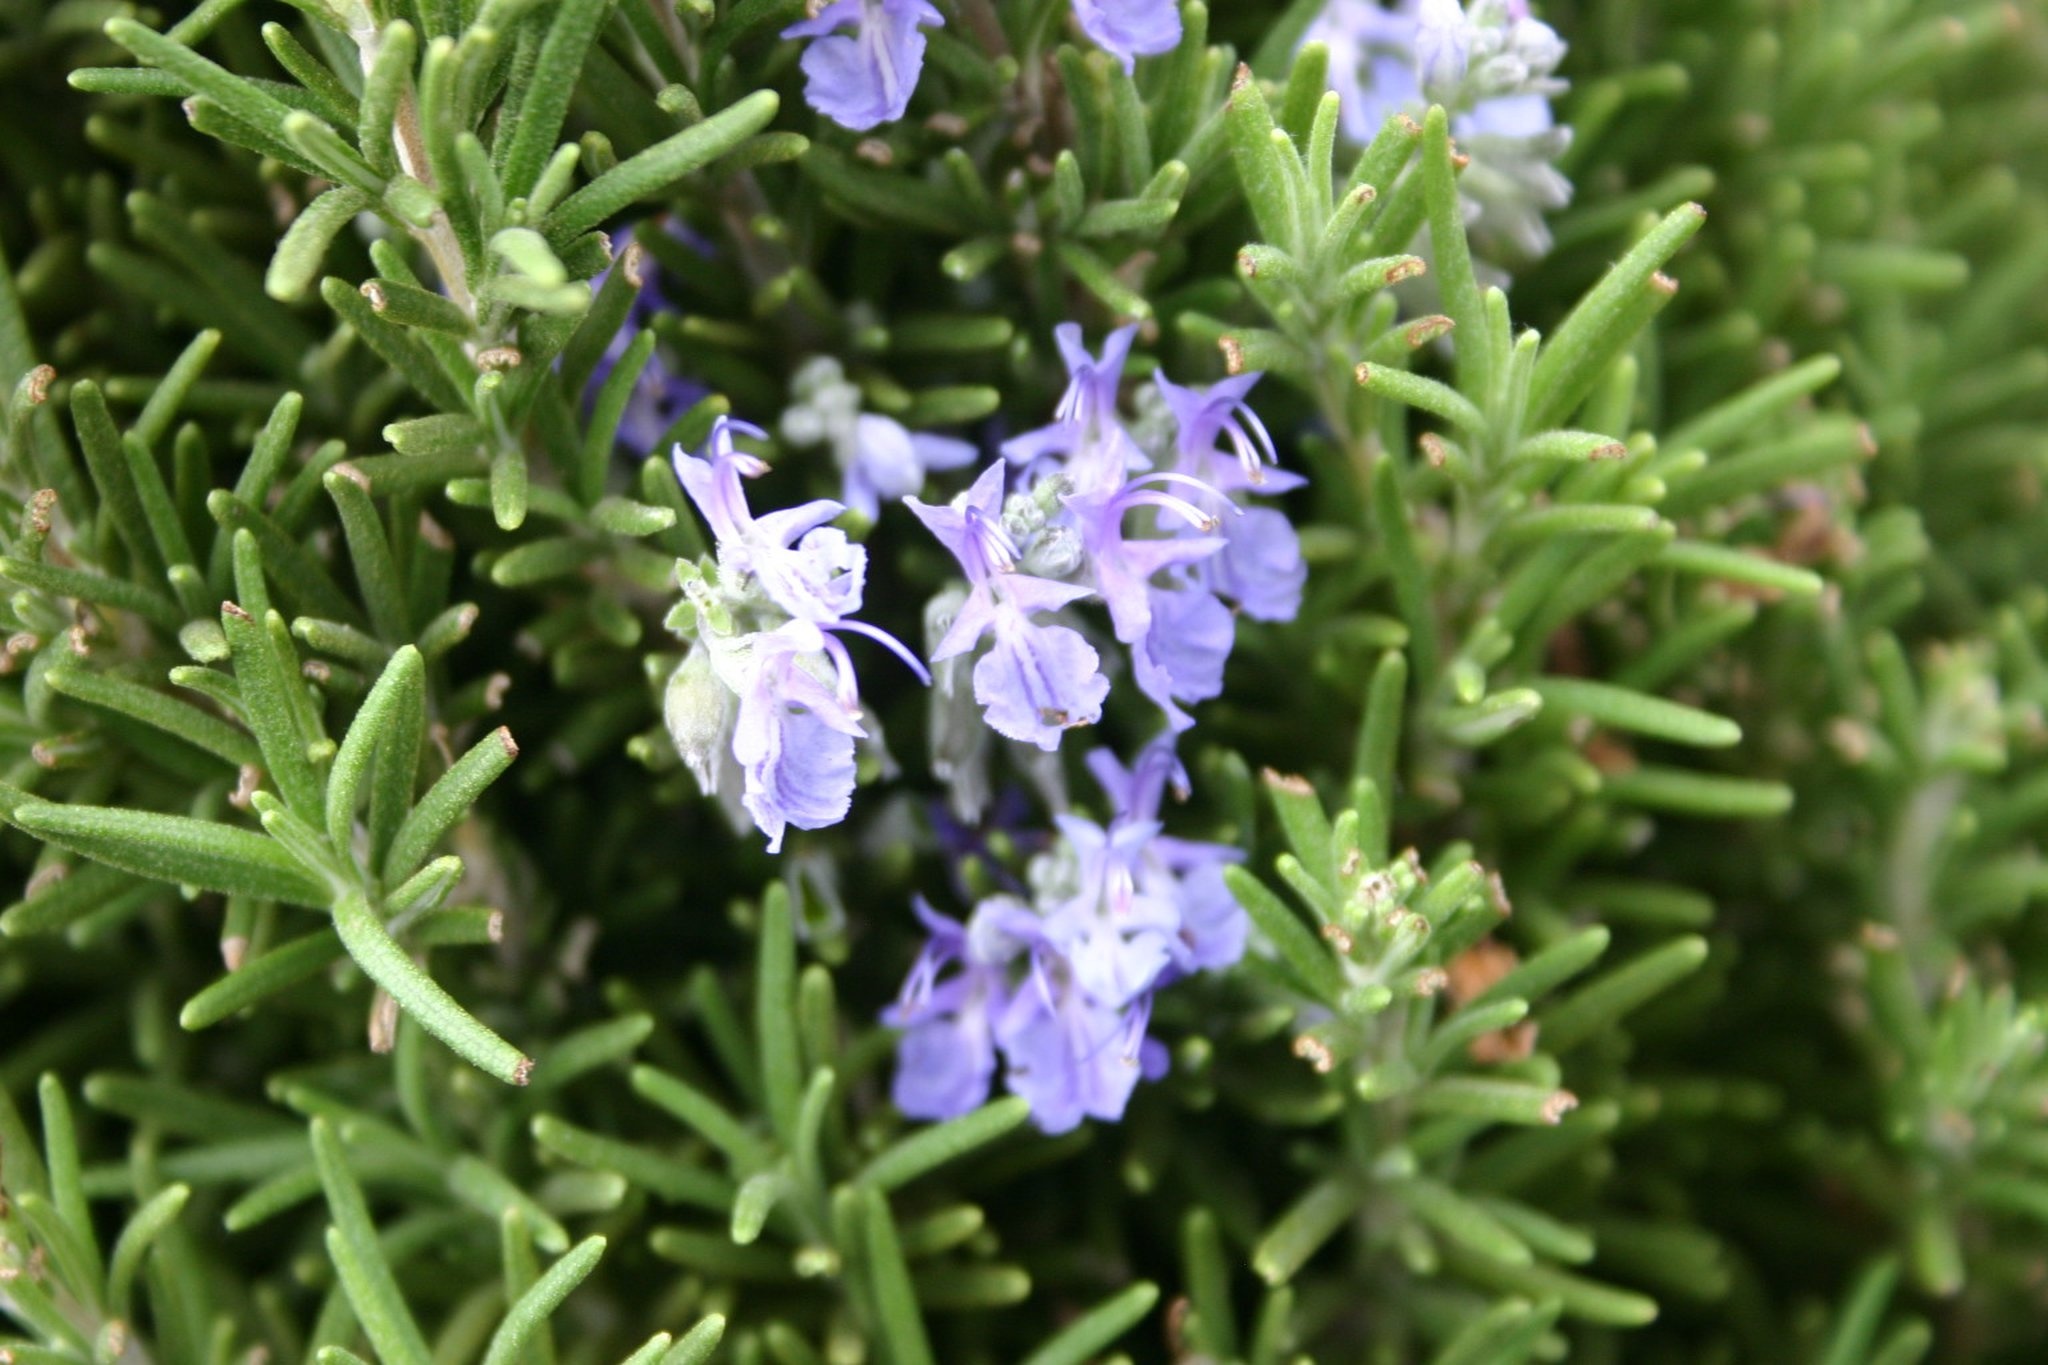 Yellowing leaves, Troublesome spider mites, Rosemary's woes, Gardening issues, 2050x1370 HD Desktop